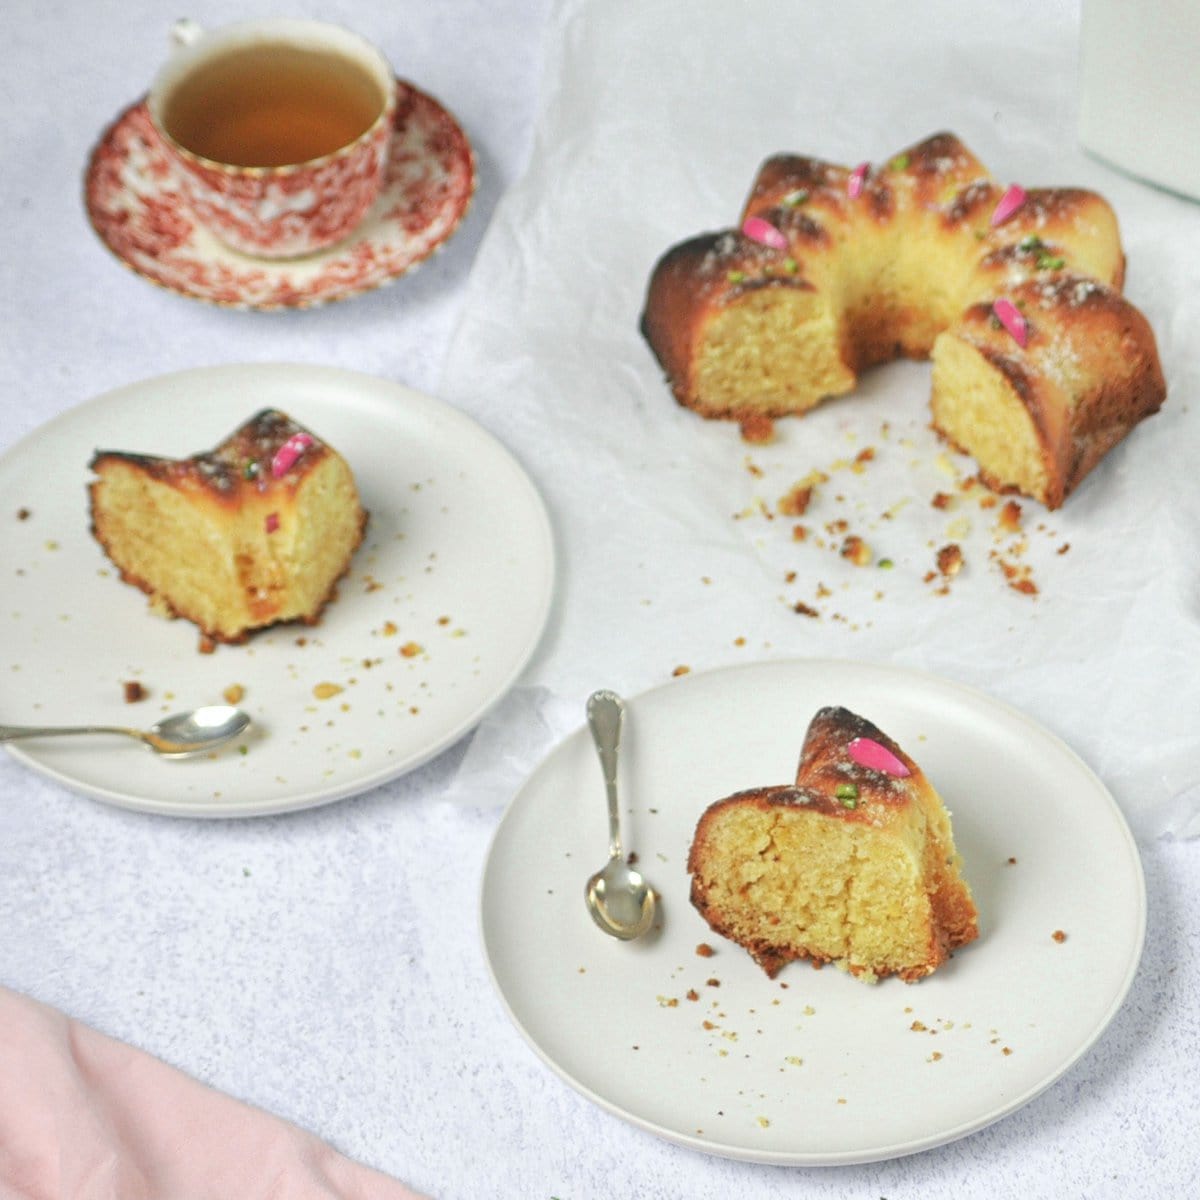 Pieces of pound cake on plates with cake and a cup of tea.